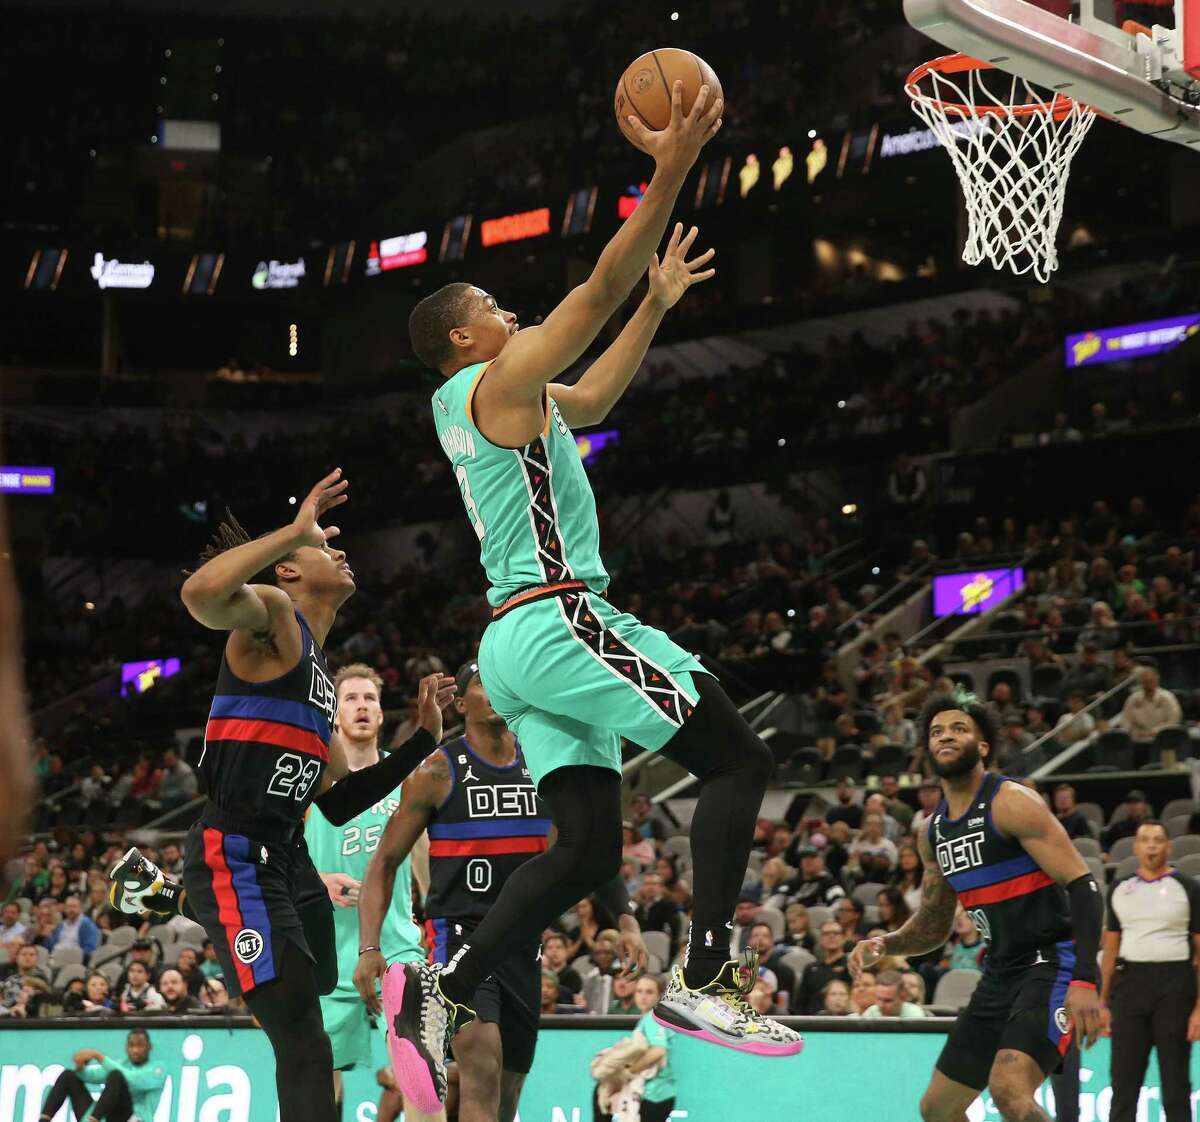 Spurs’ Keldon Johnson (03) drives past Detroit Pistons’ Jaden Ivey (23) during their game at the AT&T Center on Friday, Jan. 6, 2023. Johnson later left the floor with a hamstring injury and did not return for the rest of the game.